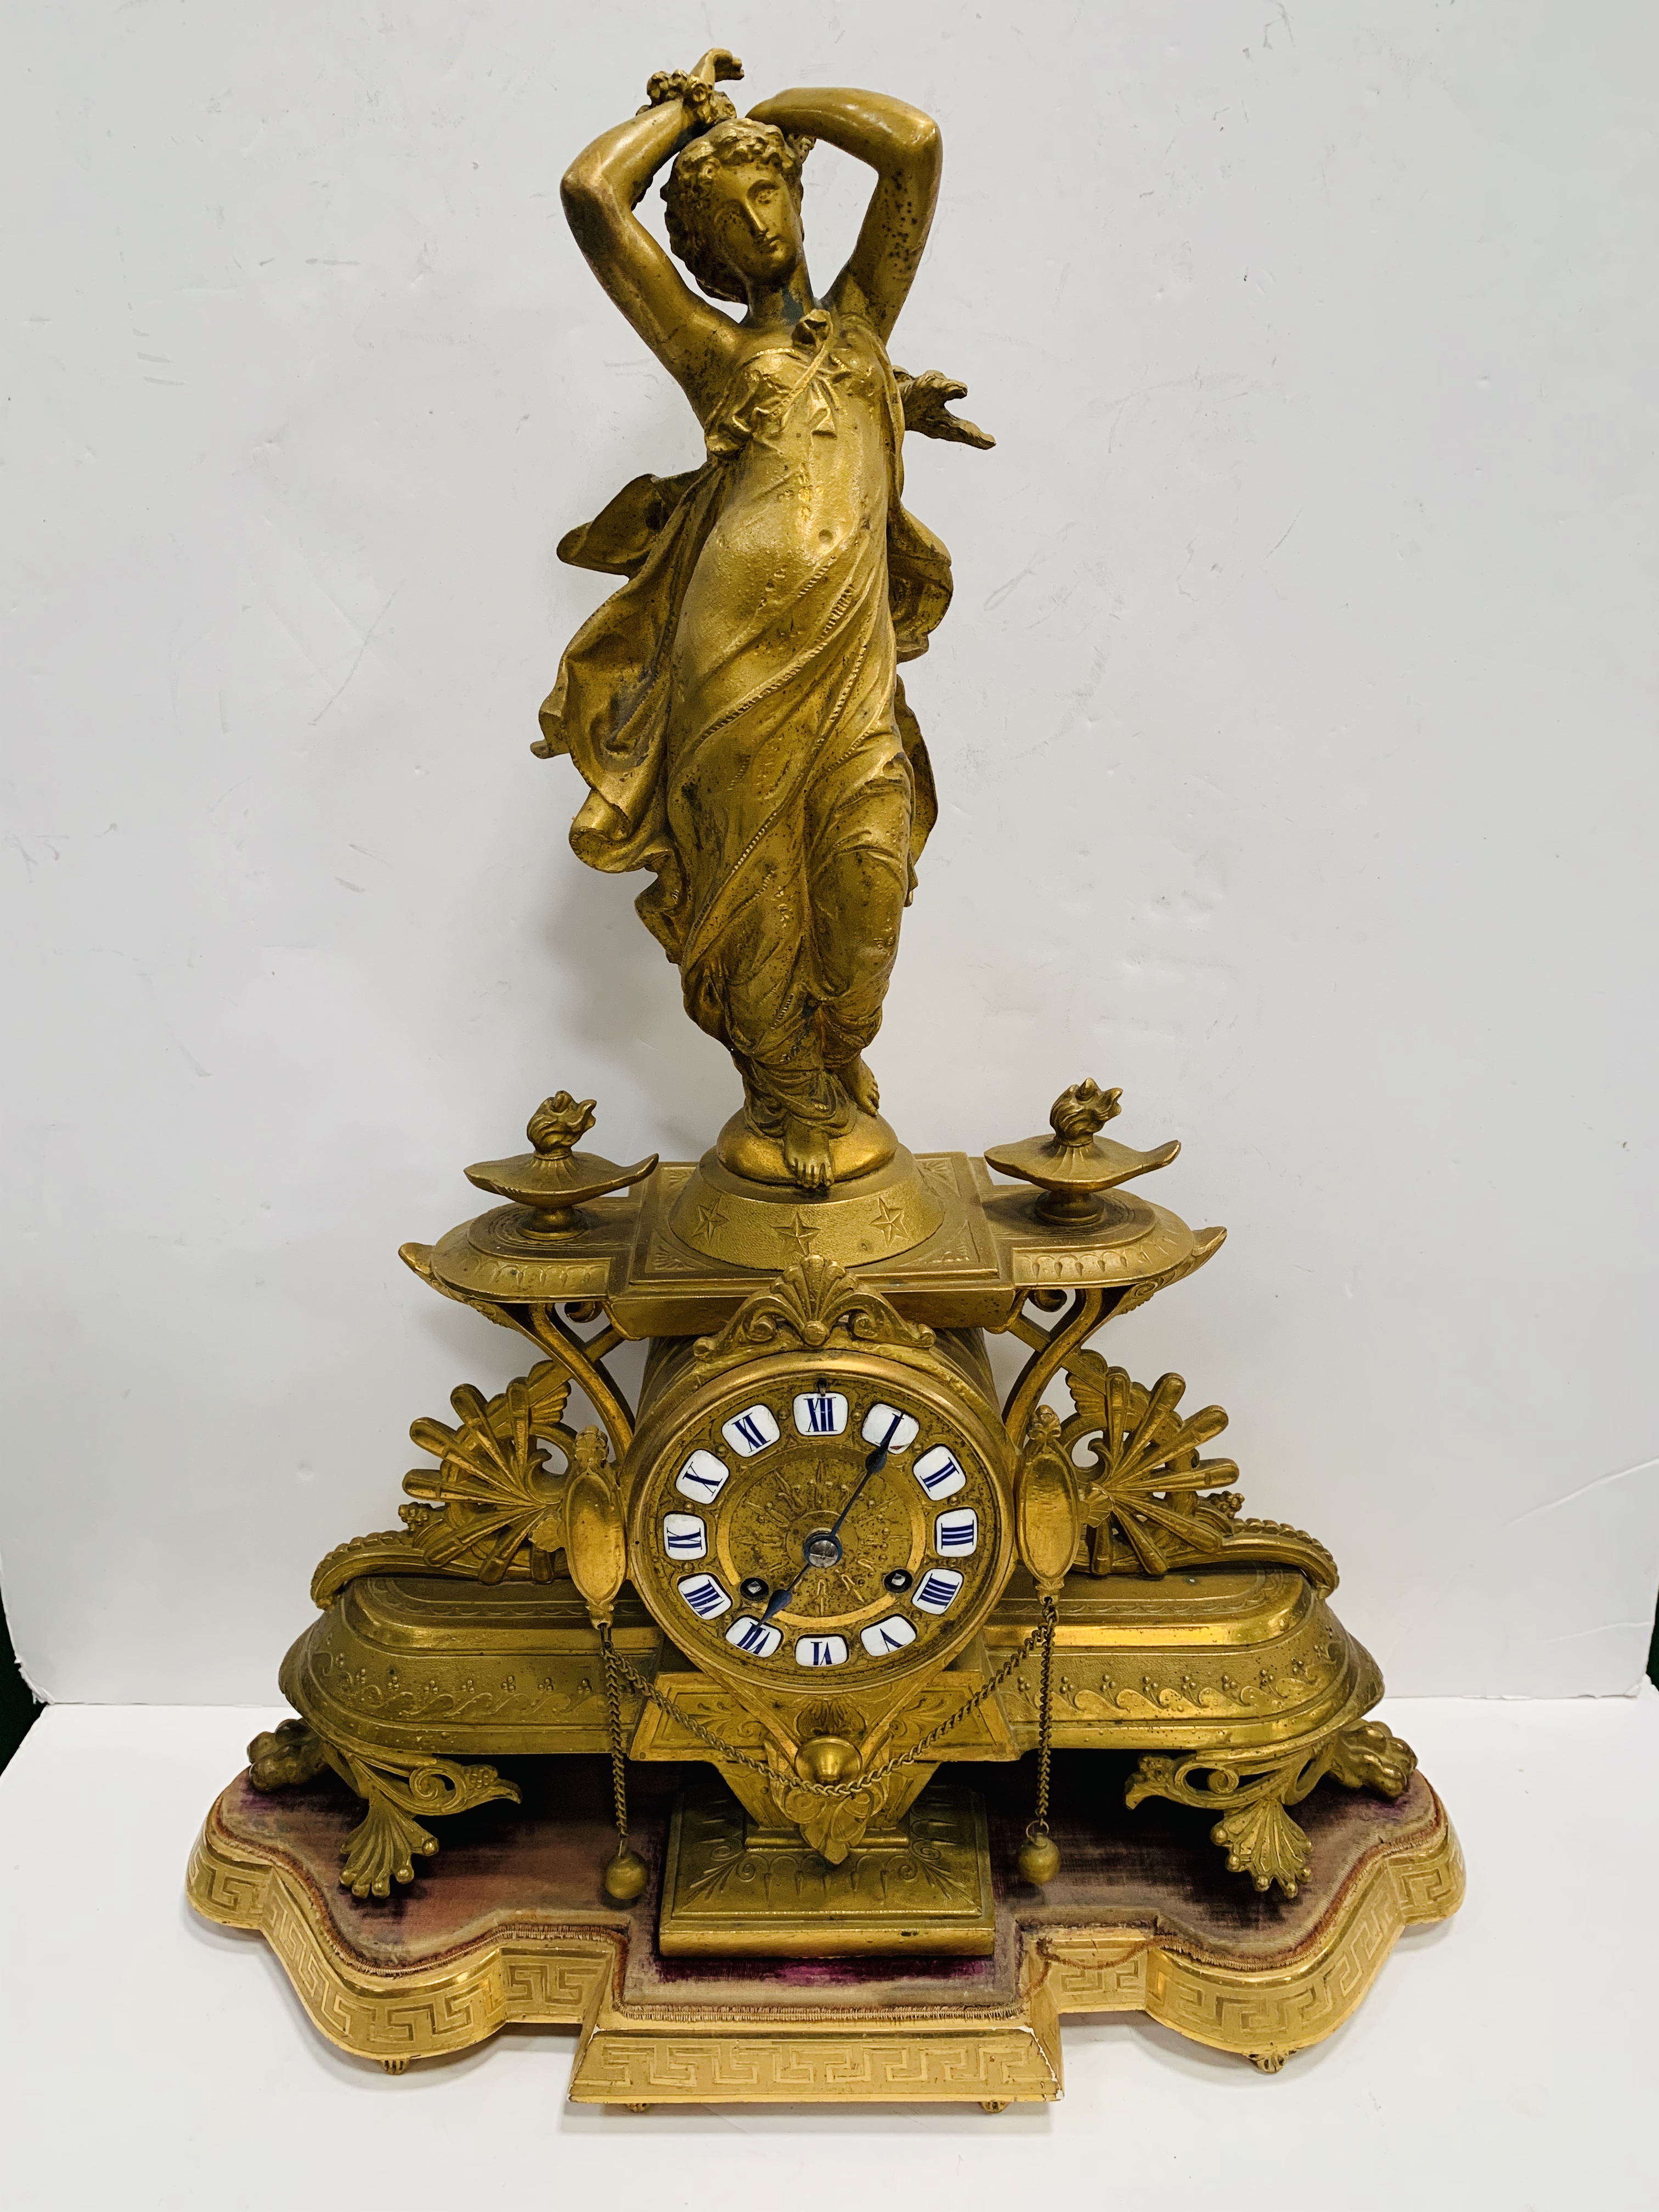 Gilded metal French mantel clock by P H Mourey.